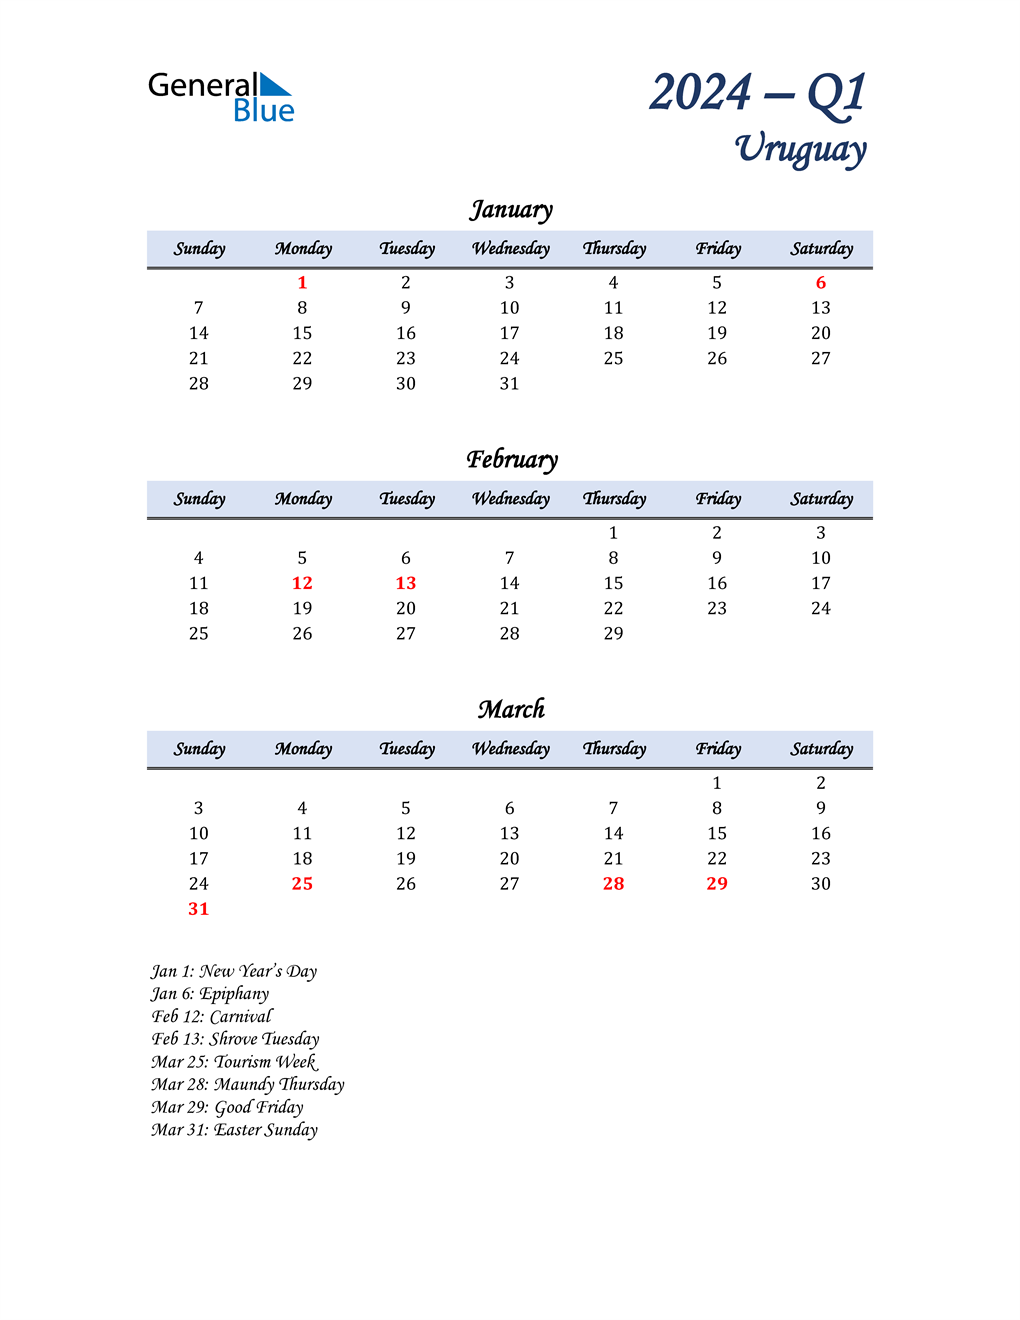  January, February, and March Calendar for Uruguay